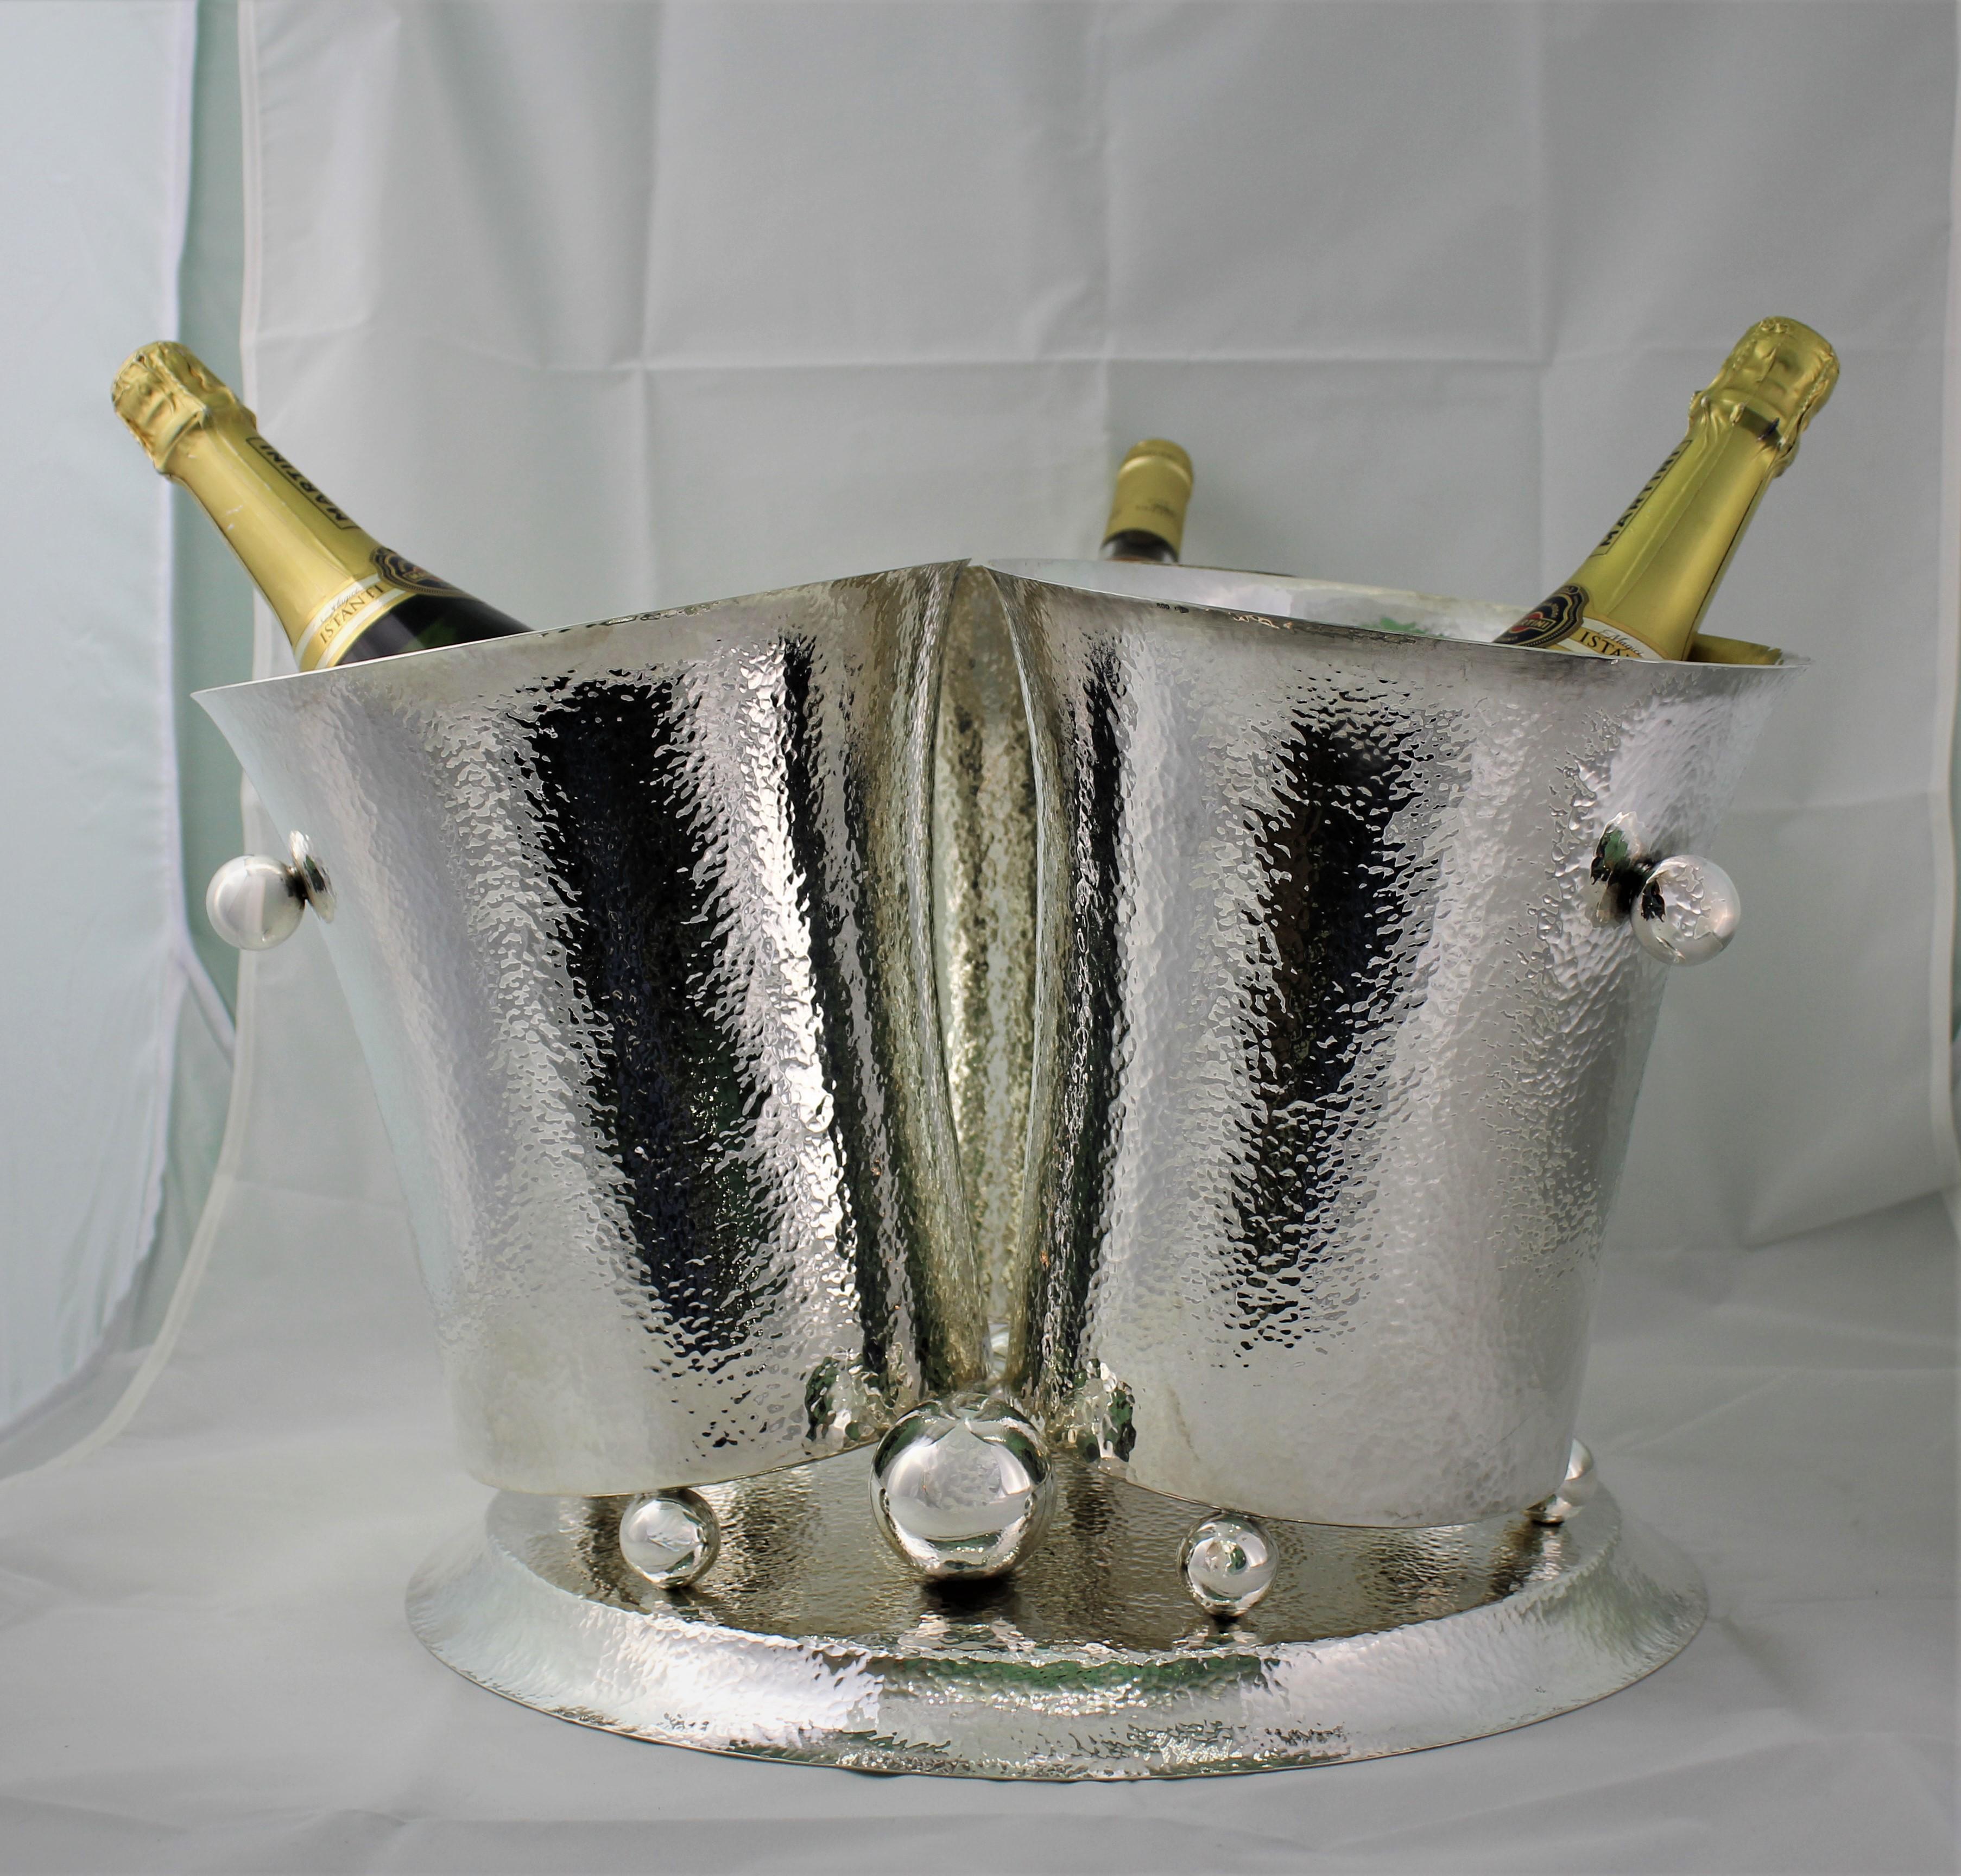 - Imposing Art Deco Centerpiece dated 1930s realized in Silver 800/1000 -

- Handworker and hammered - 

 - Realized between 1934 and 1944 by the bolognese master silversmith Aldo De Mori -

- 3 hammered silver buckets -

- Dimension: